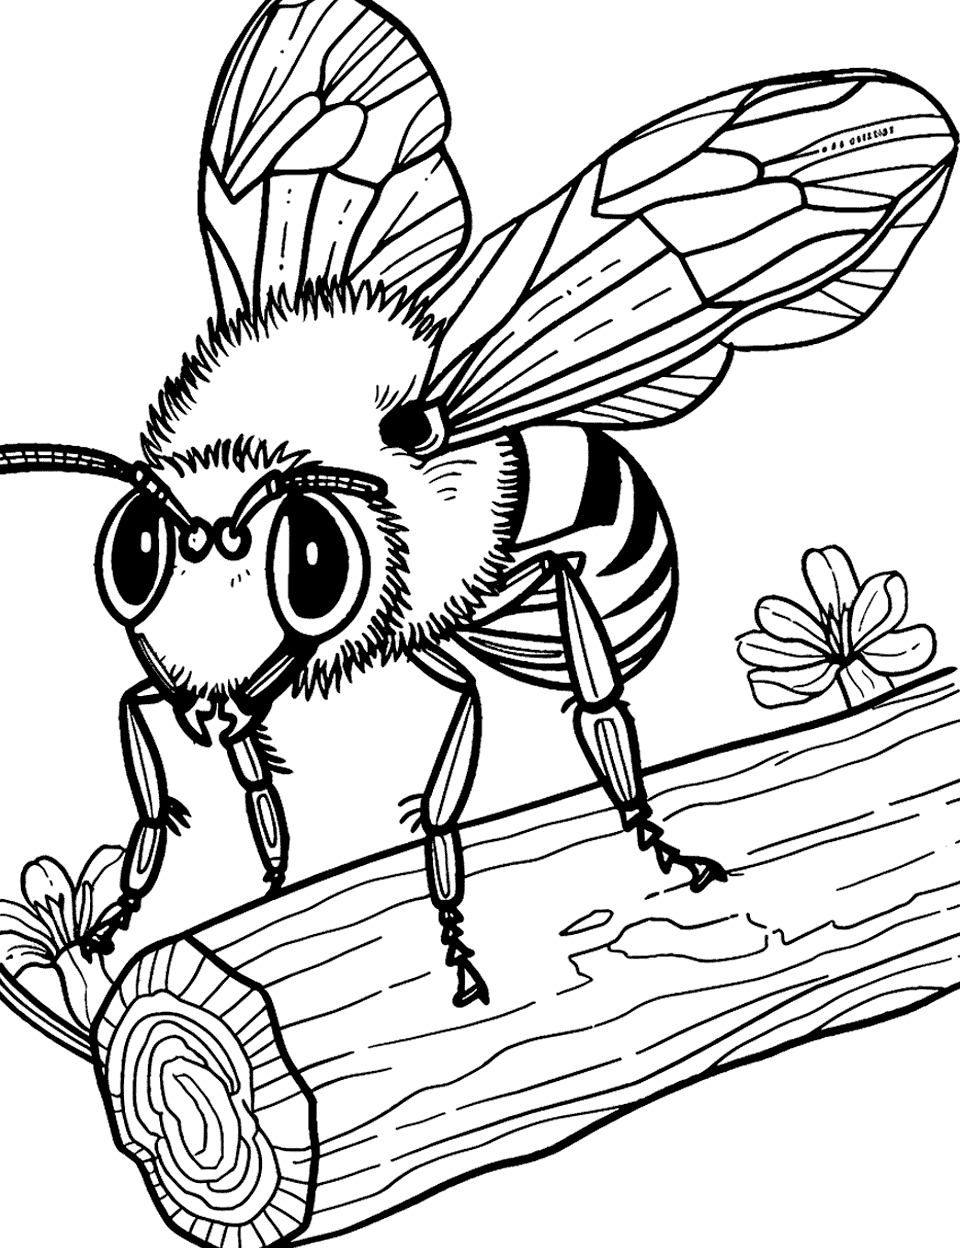 Carpenter Bee Drilling Wood Coloring Page - A carpenter bee ready to drill into a piece of wood.